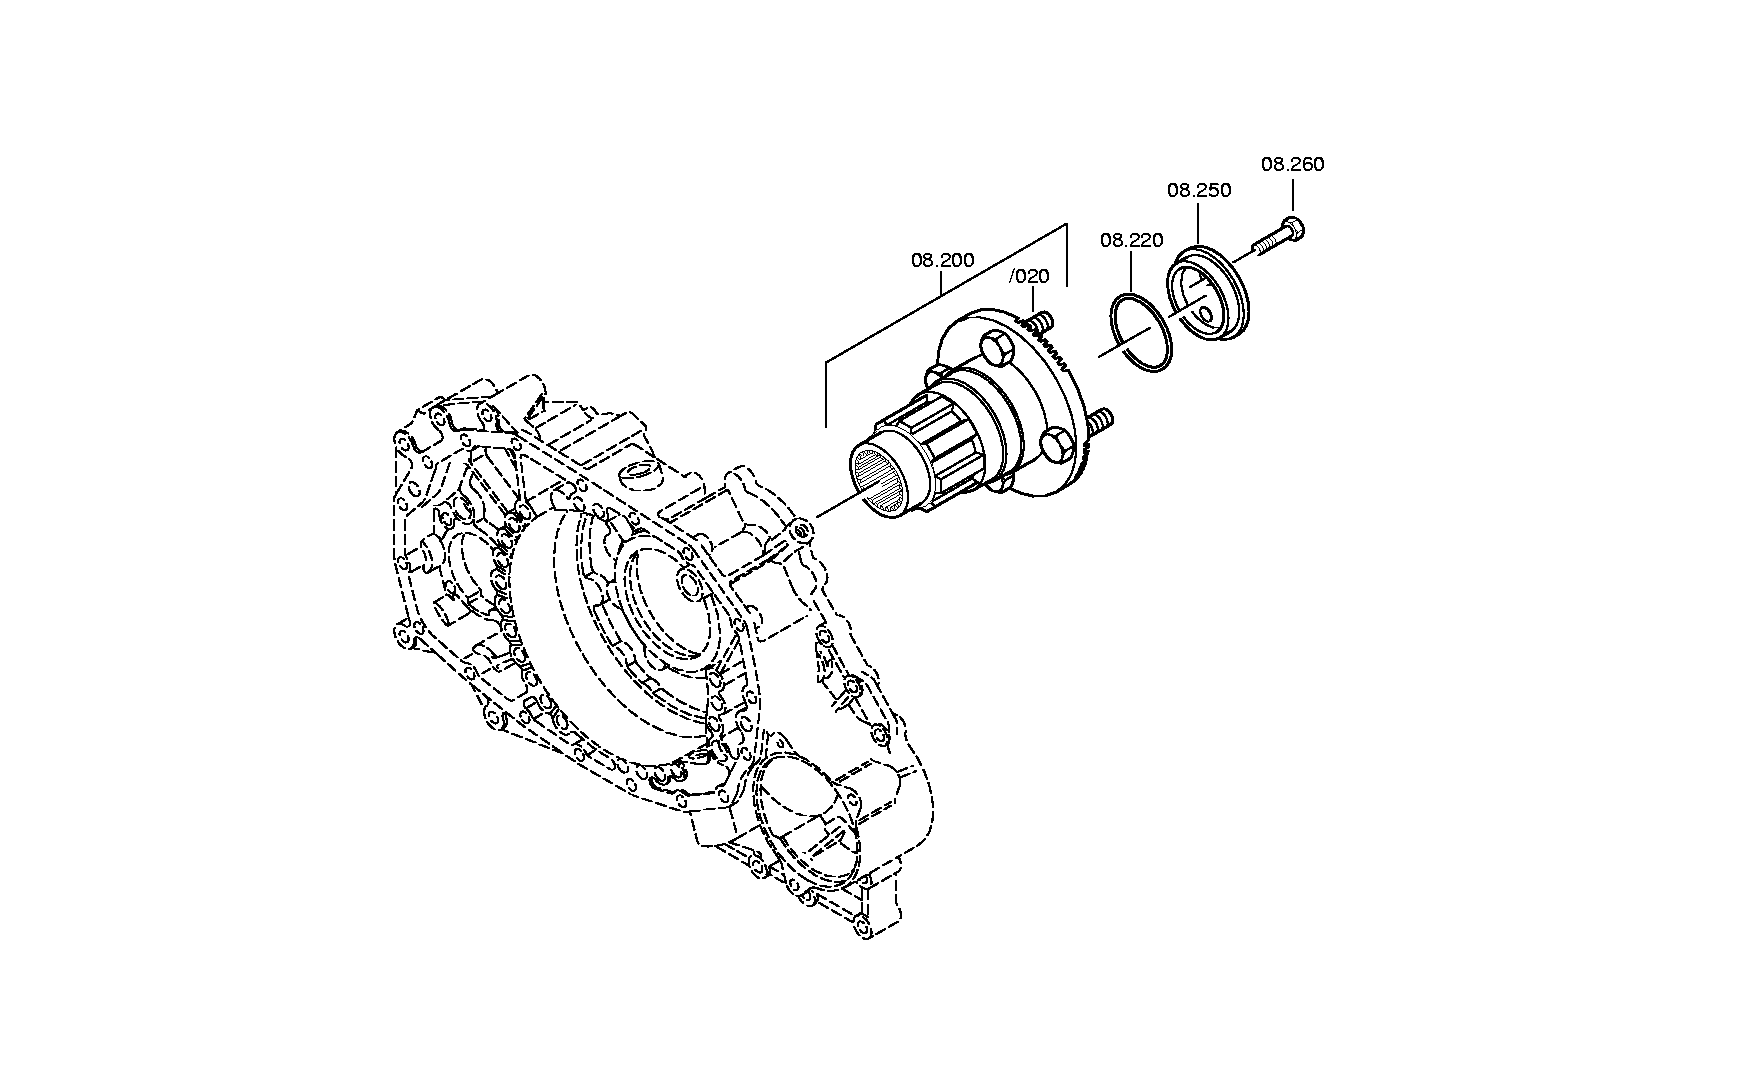 drawing for VOITH-GETRIEBE KG 1900038006370 - HEXAGON SCREW (figure 1)